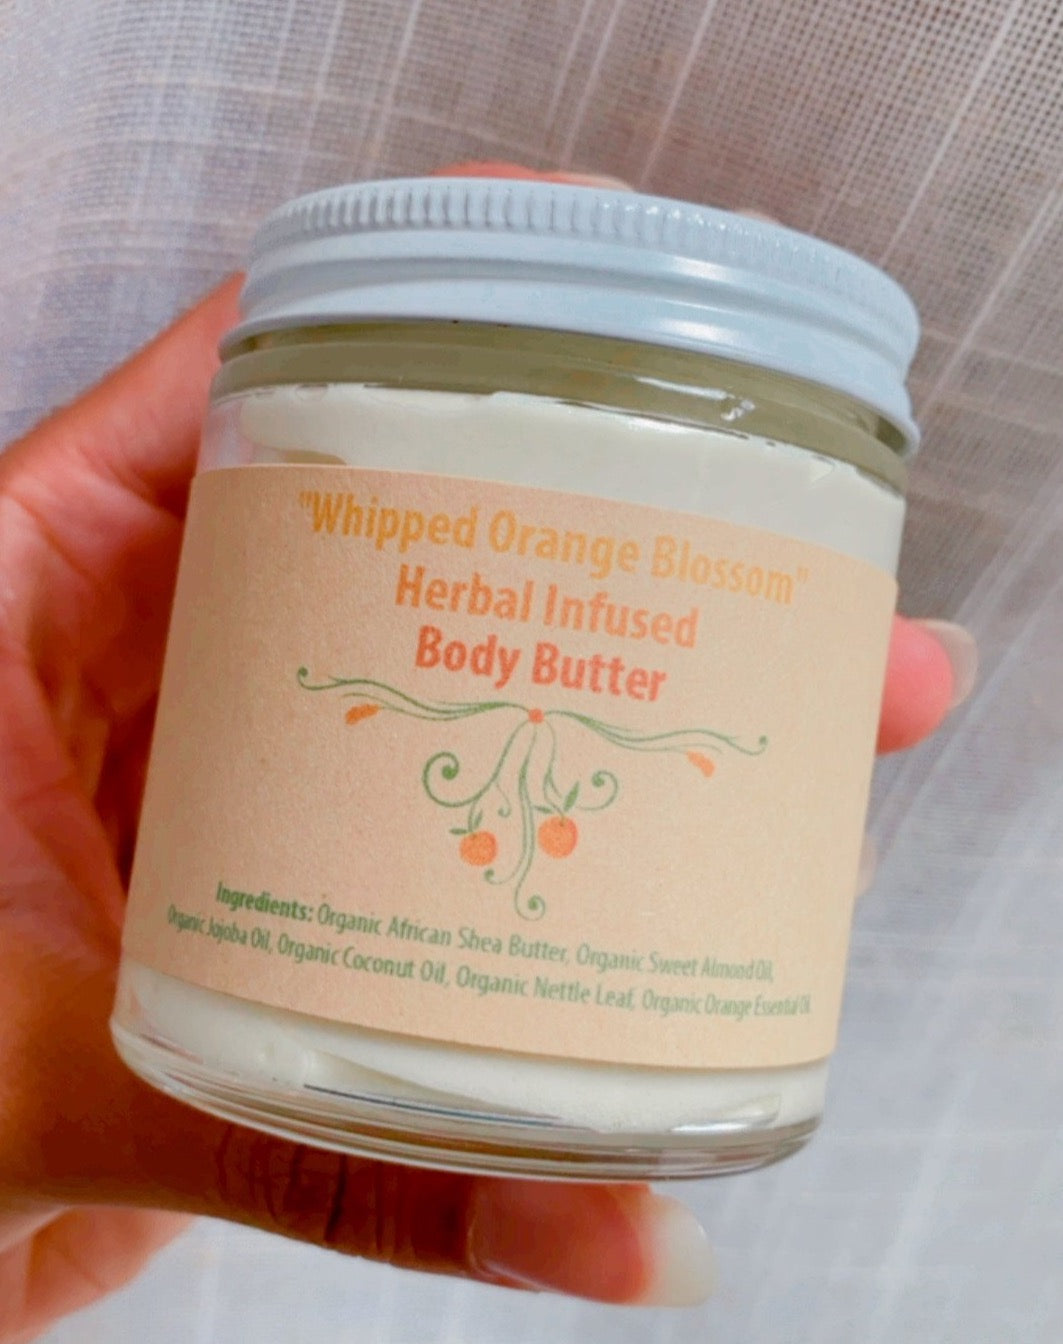 "Whipped Orange Blossom" Herbal Infused Body Butter